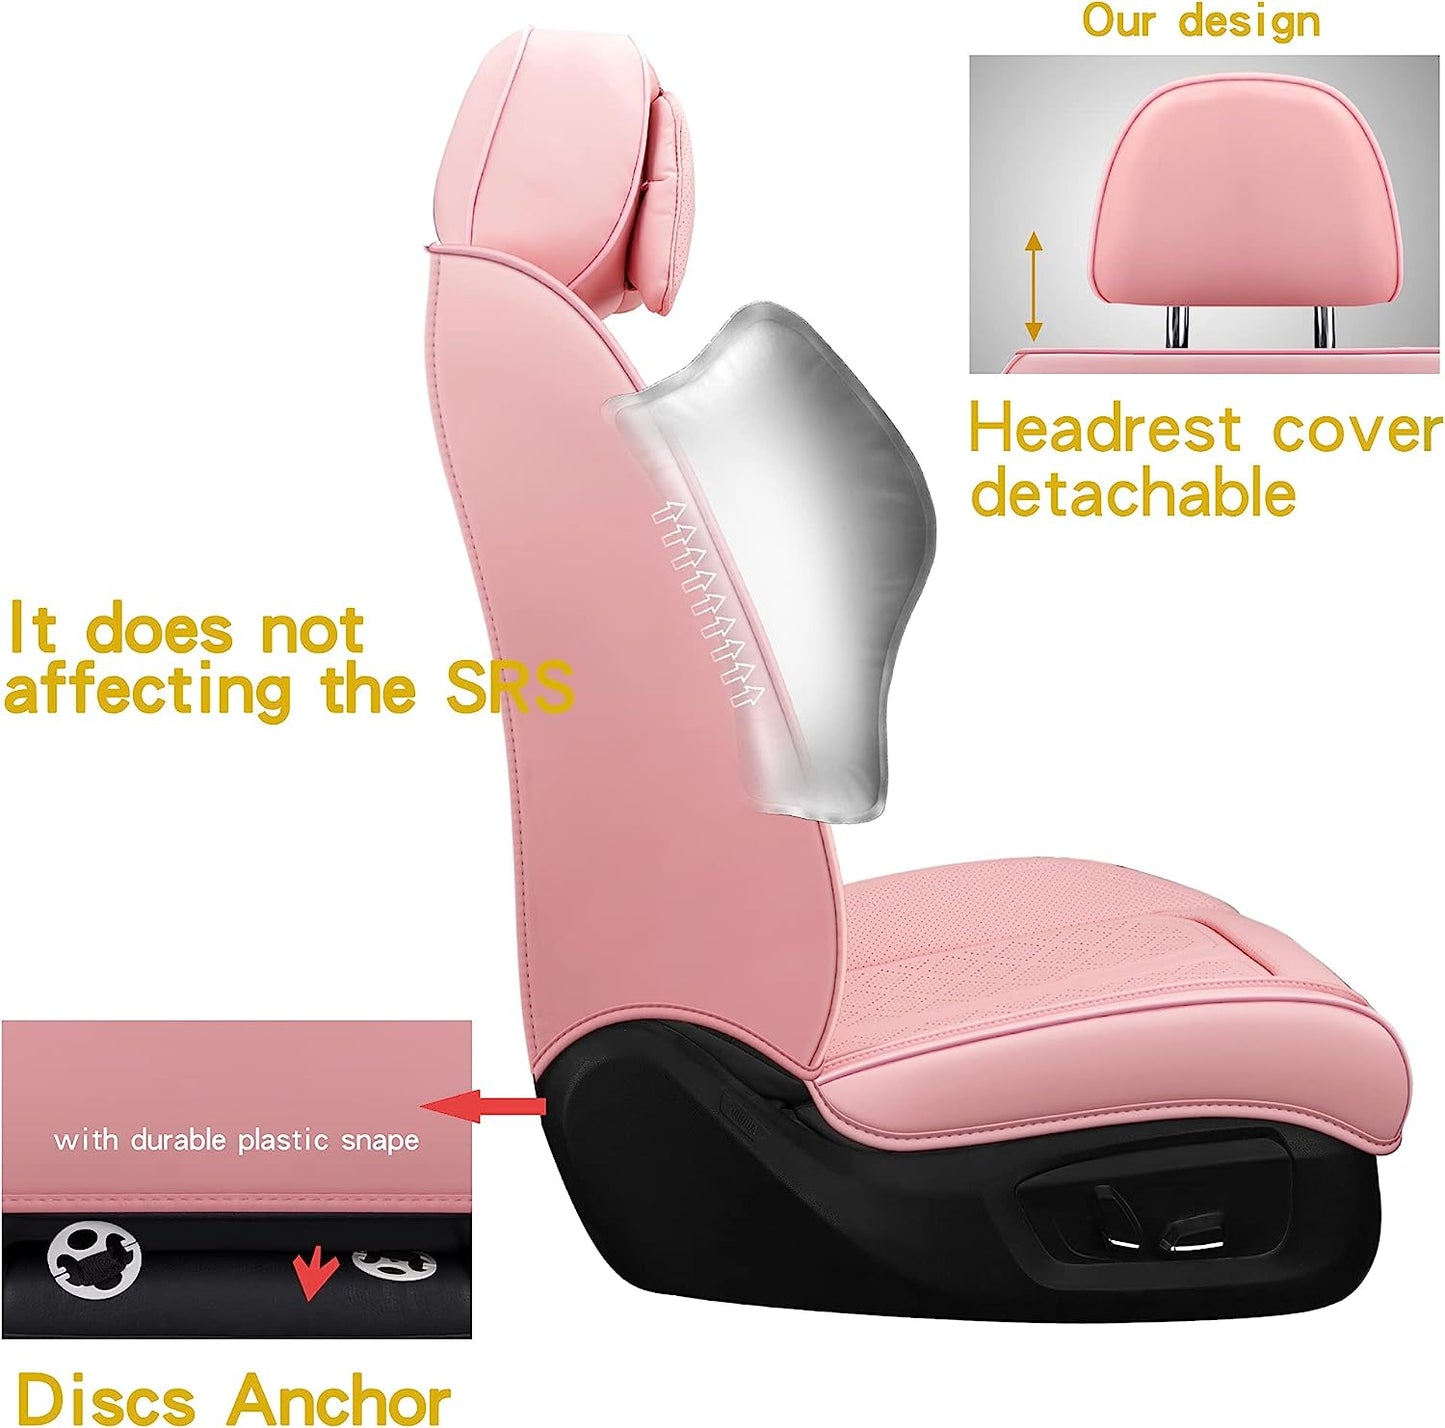 5 Seat Full Set Coverage Faux Leather Car Seat Covers